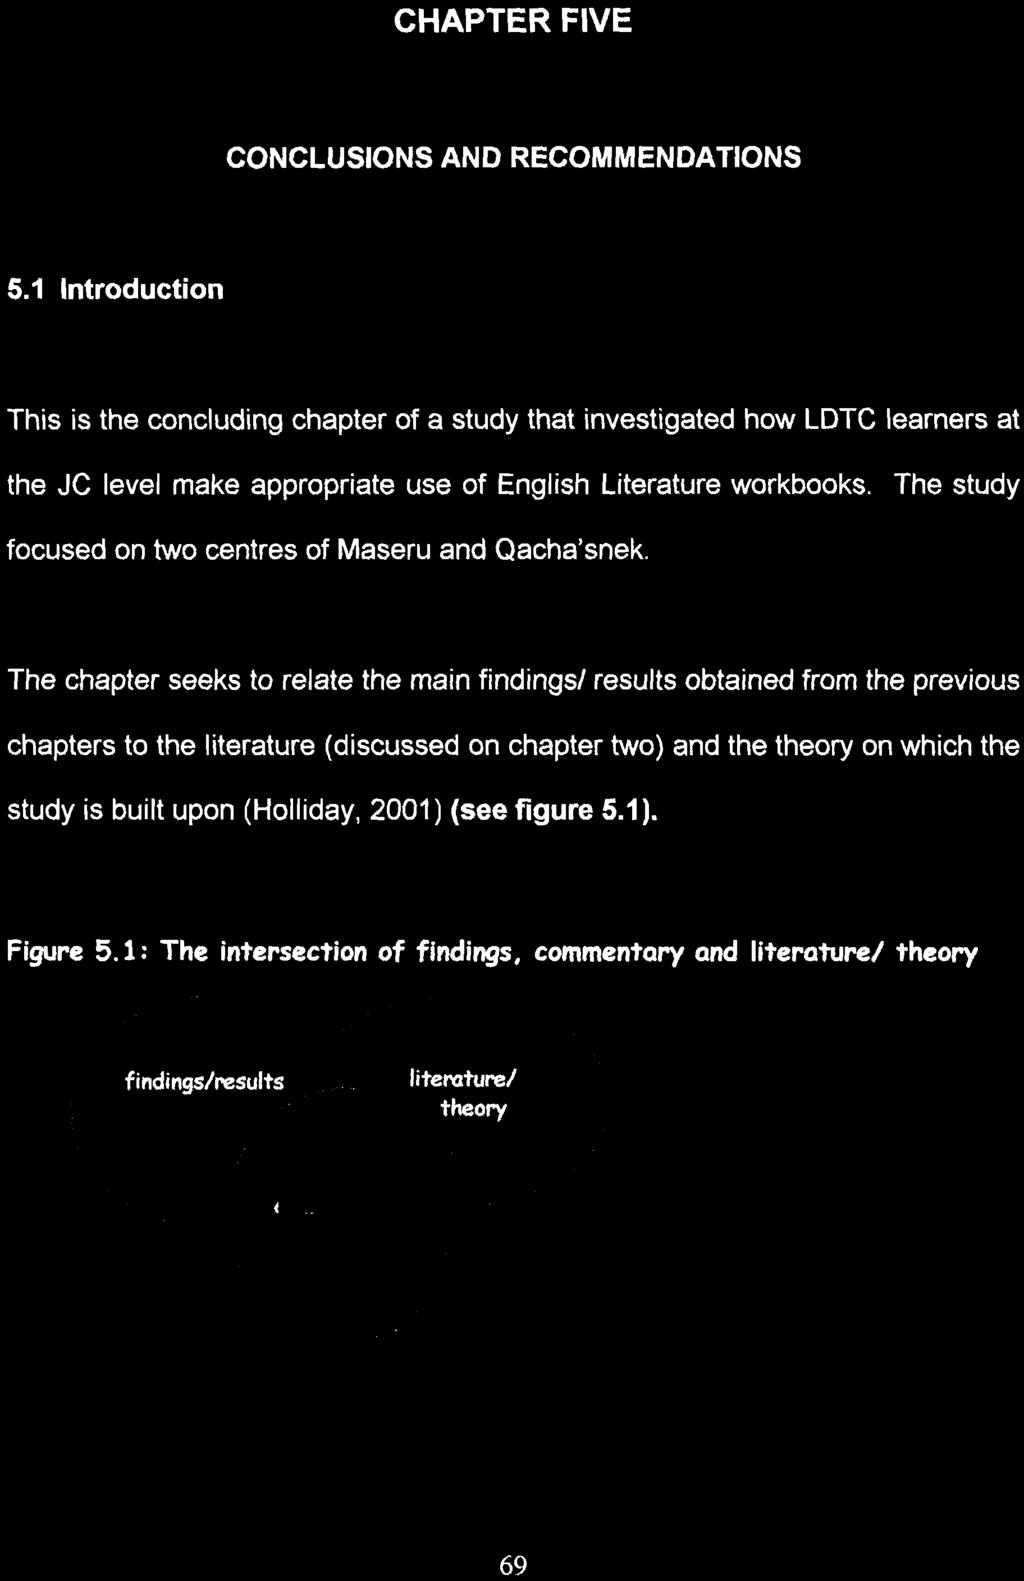 The chapter seeks to relate the main findingsl results obtained from the previous chapters to the